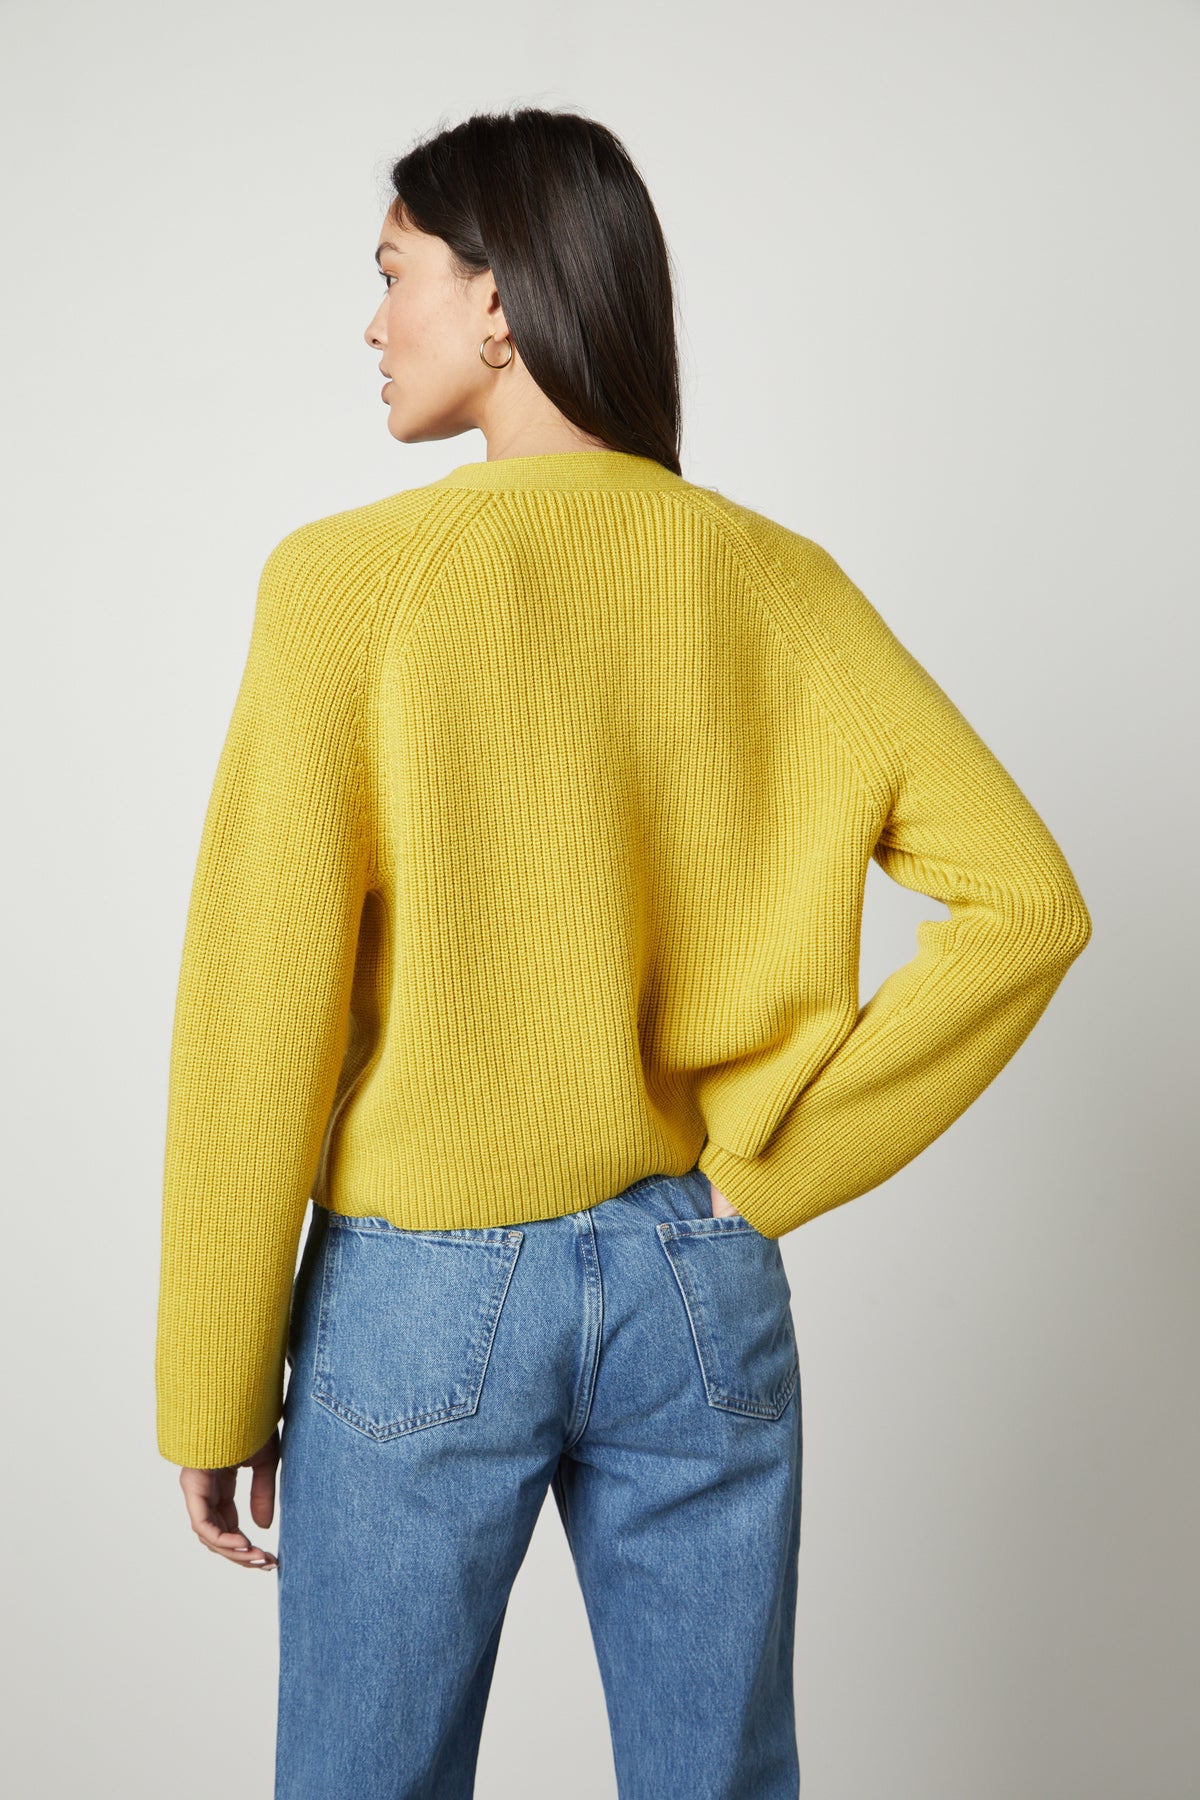   The back view of a woman wearing a Velvet by Graham & Spencer MARILYN BUTTON FRONT CARDIGAN  in sunflower yellow and jeans. 